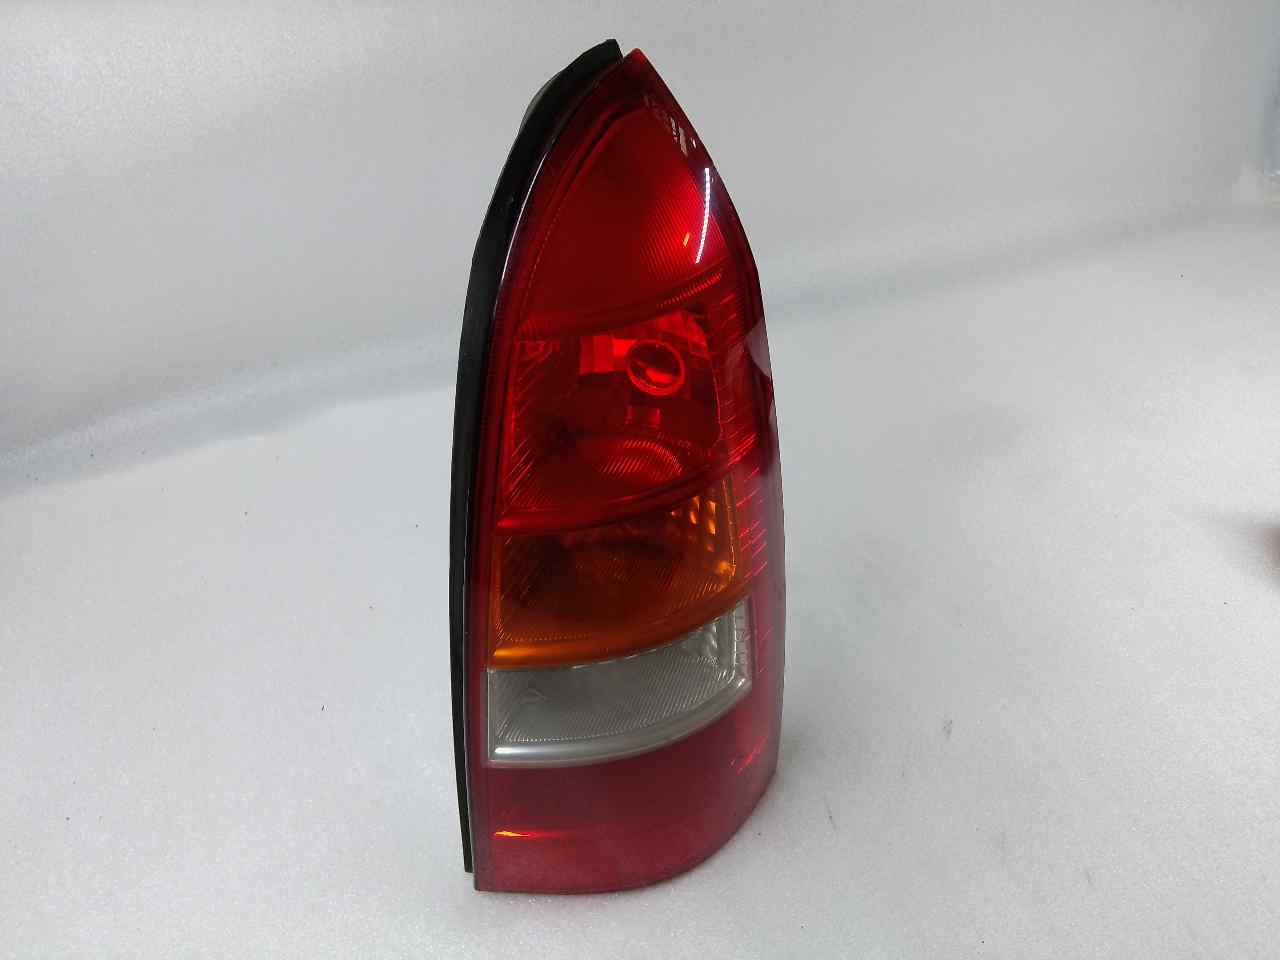 OPEL Astra H (2004-2014) Rear Right Taillight Lamp 393032 24839788